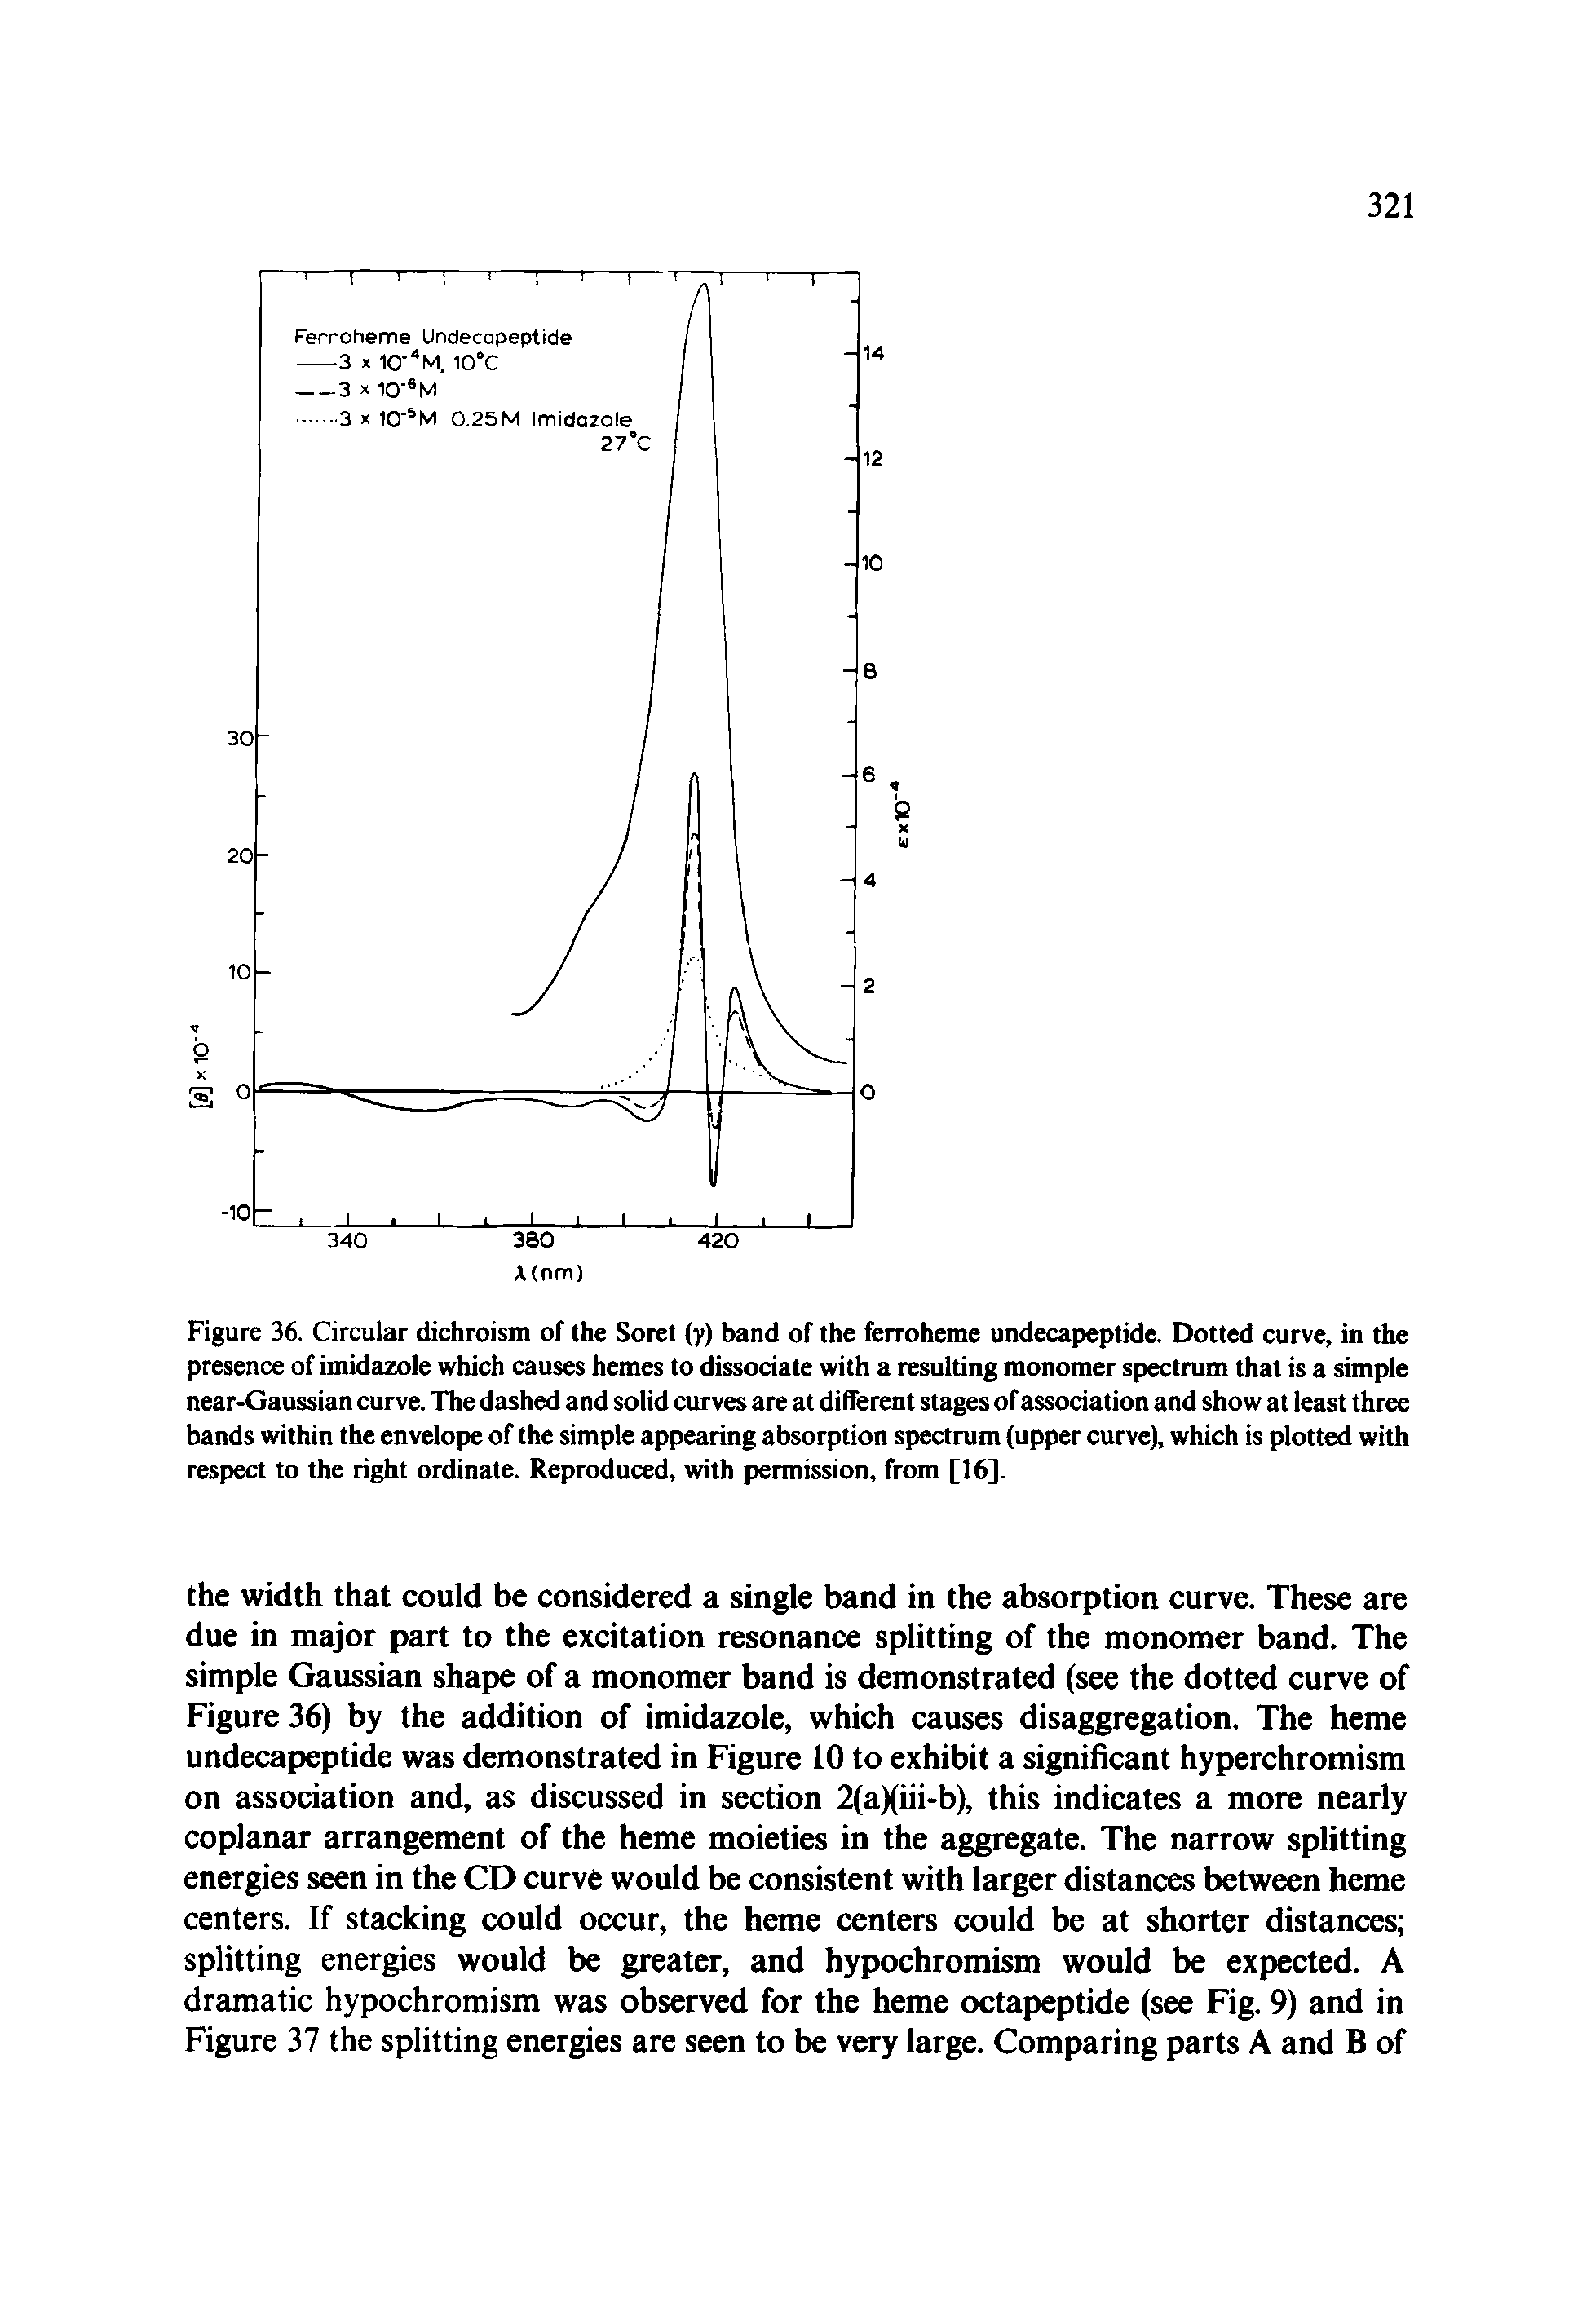 Figure 36. Circular dichroism of the Soret (y) band of the ferroheme undecapeptide. Dotted curve, in the presence of imidazole which causes hemes to dissociate with a resulting monomer spectrum that is a simple near-Gaussian curve. The dashed and solid curves are at different stages of association and show at least three bands within the envelope of the simple appearing absorption spectrum (upper curve), which is plotted with respect to the right ordinate. Reproduced, with permission, from [16].